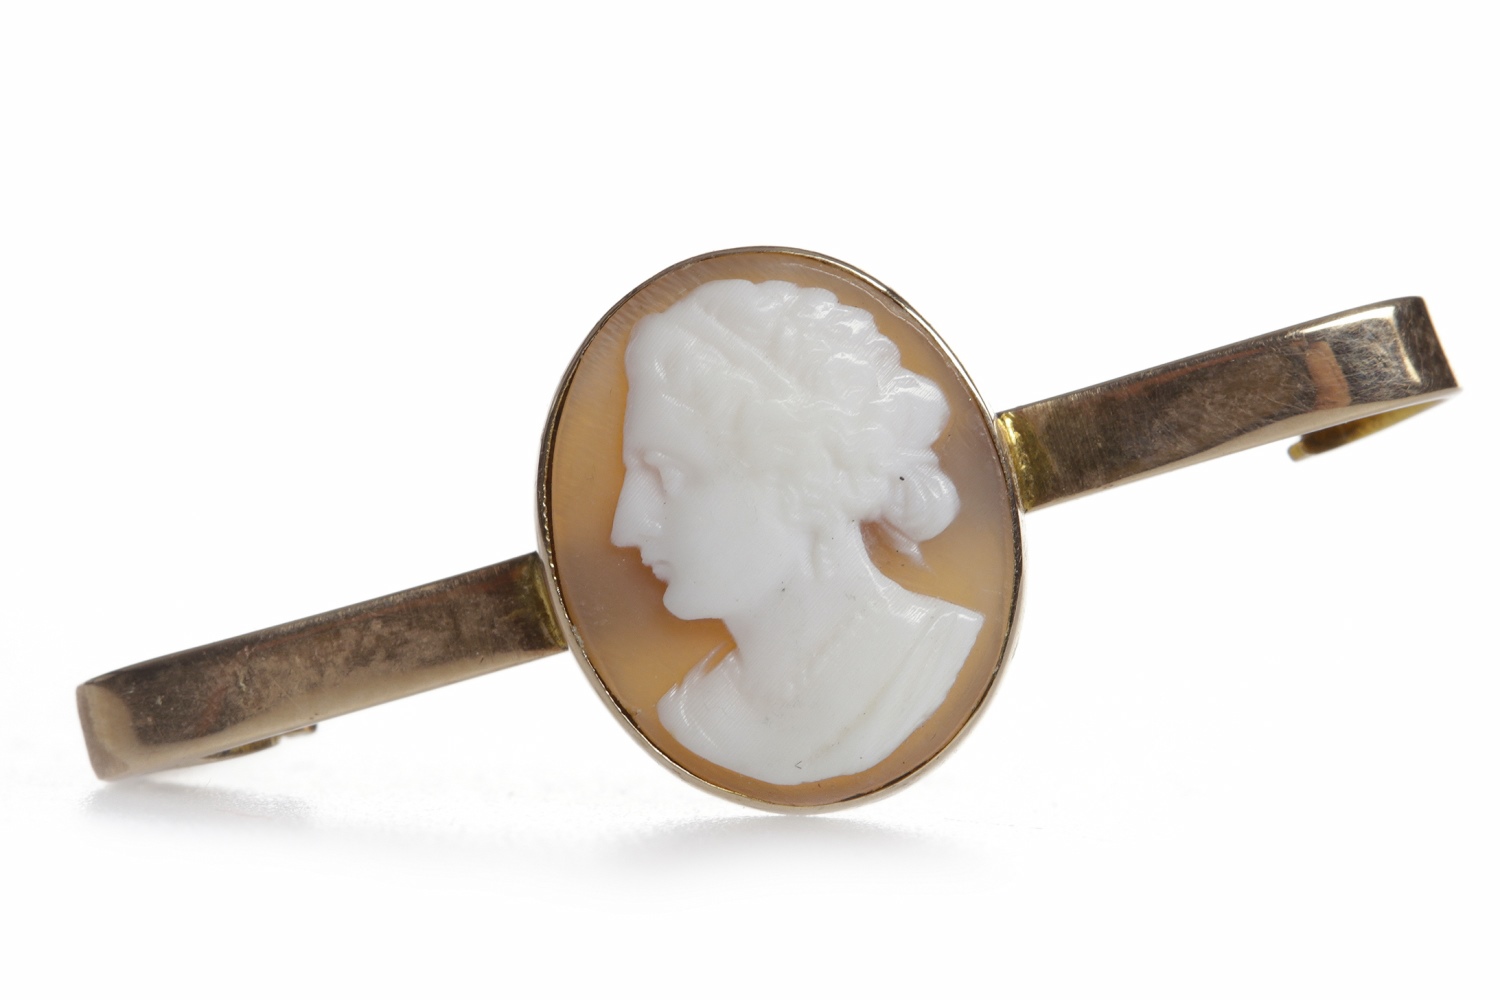 LATE VICTORIAN CAMEO BROOCH the cameo carved to depict a female profile facing left, 3.5cm in